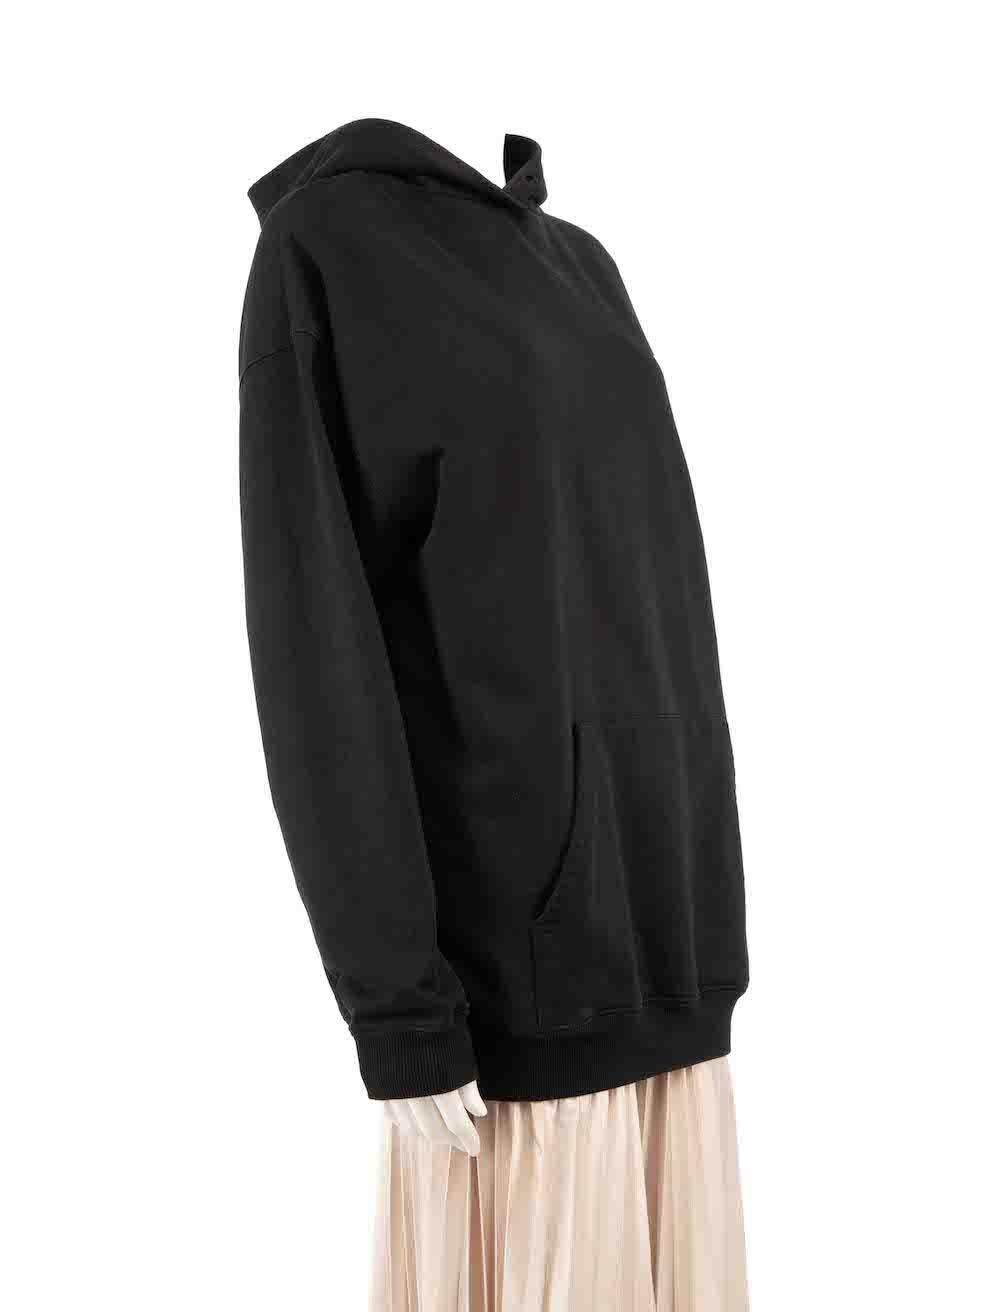 CONDITION is Very good. Hardly any visible wear to the hoodie is evident on this used Balenciaga designer resale item.
 
 
 
 Details
 
 
 Unisex
 
 Black
 
 Cotton
 
 Oversized hoodie
 
 Logo detail on front and back
 
 Hooded
 
 Centre pocket
 
 
